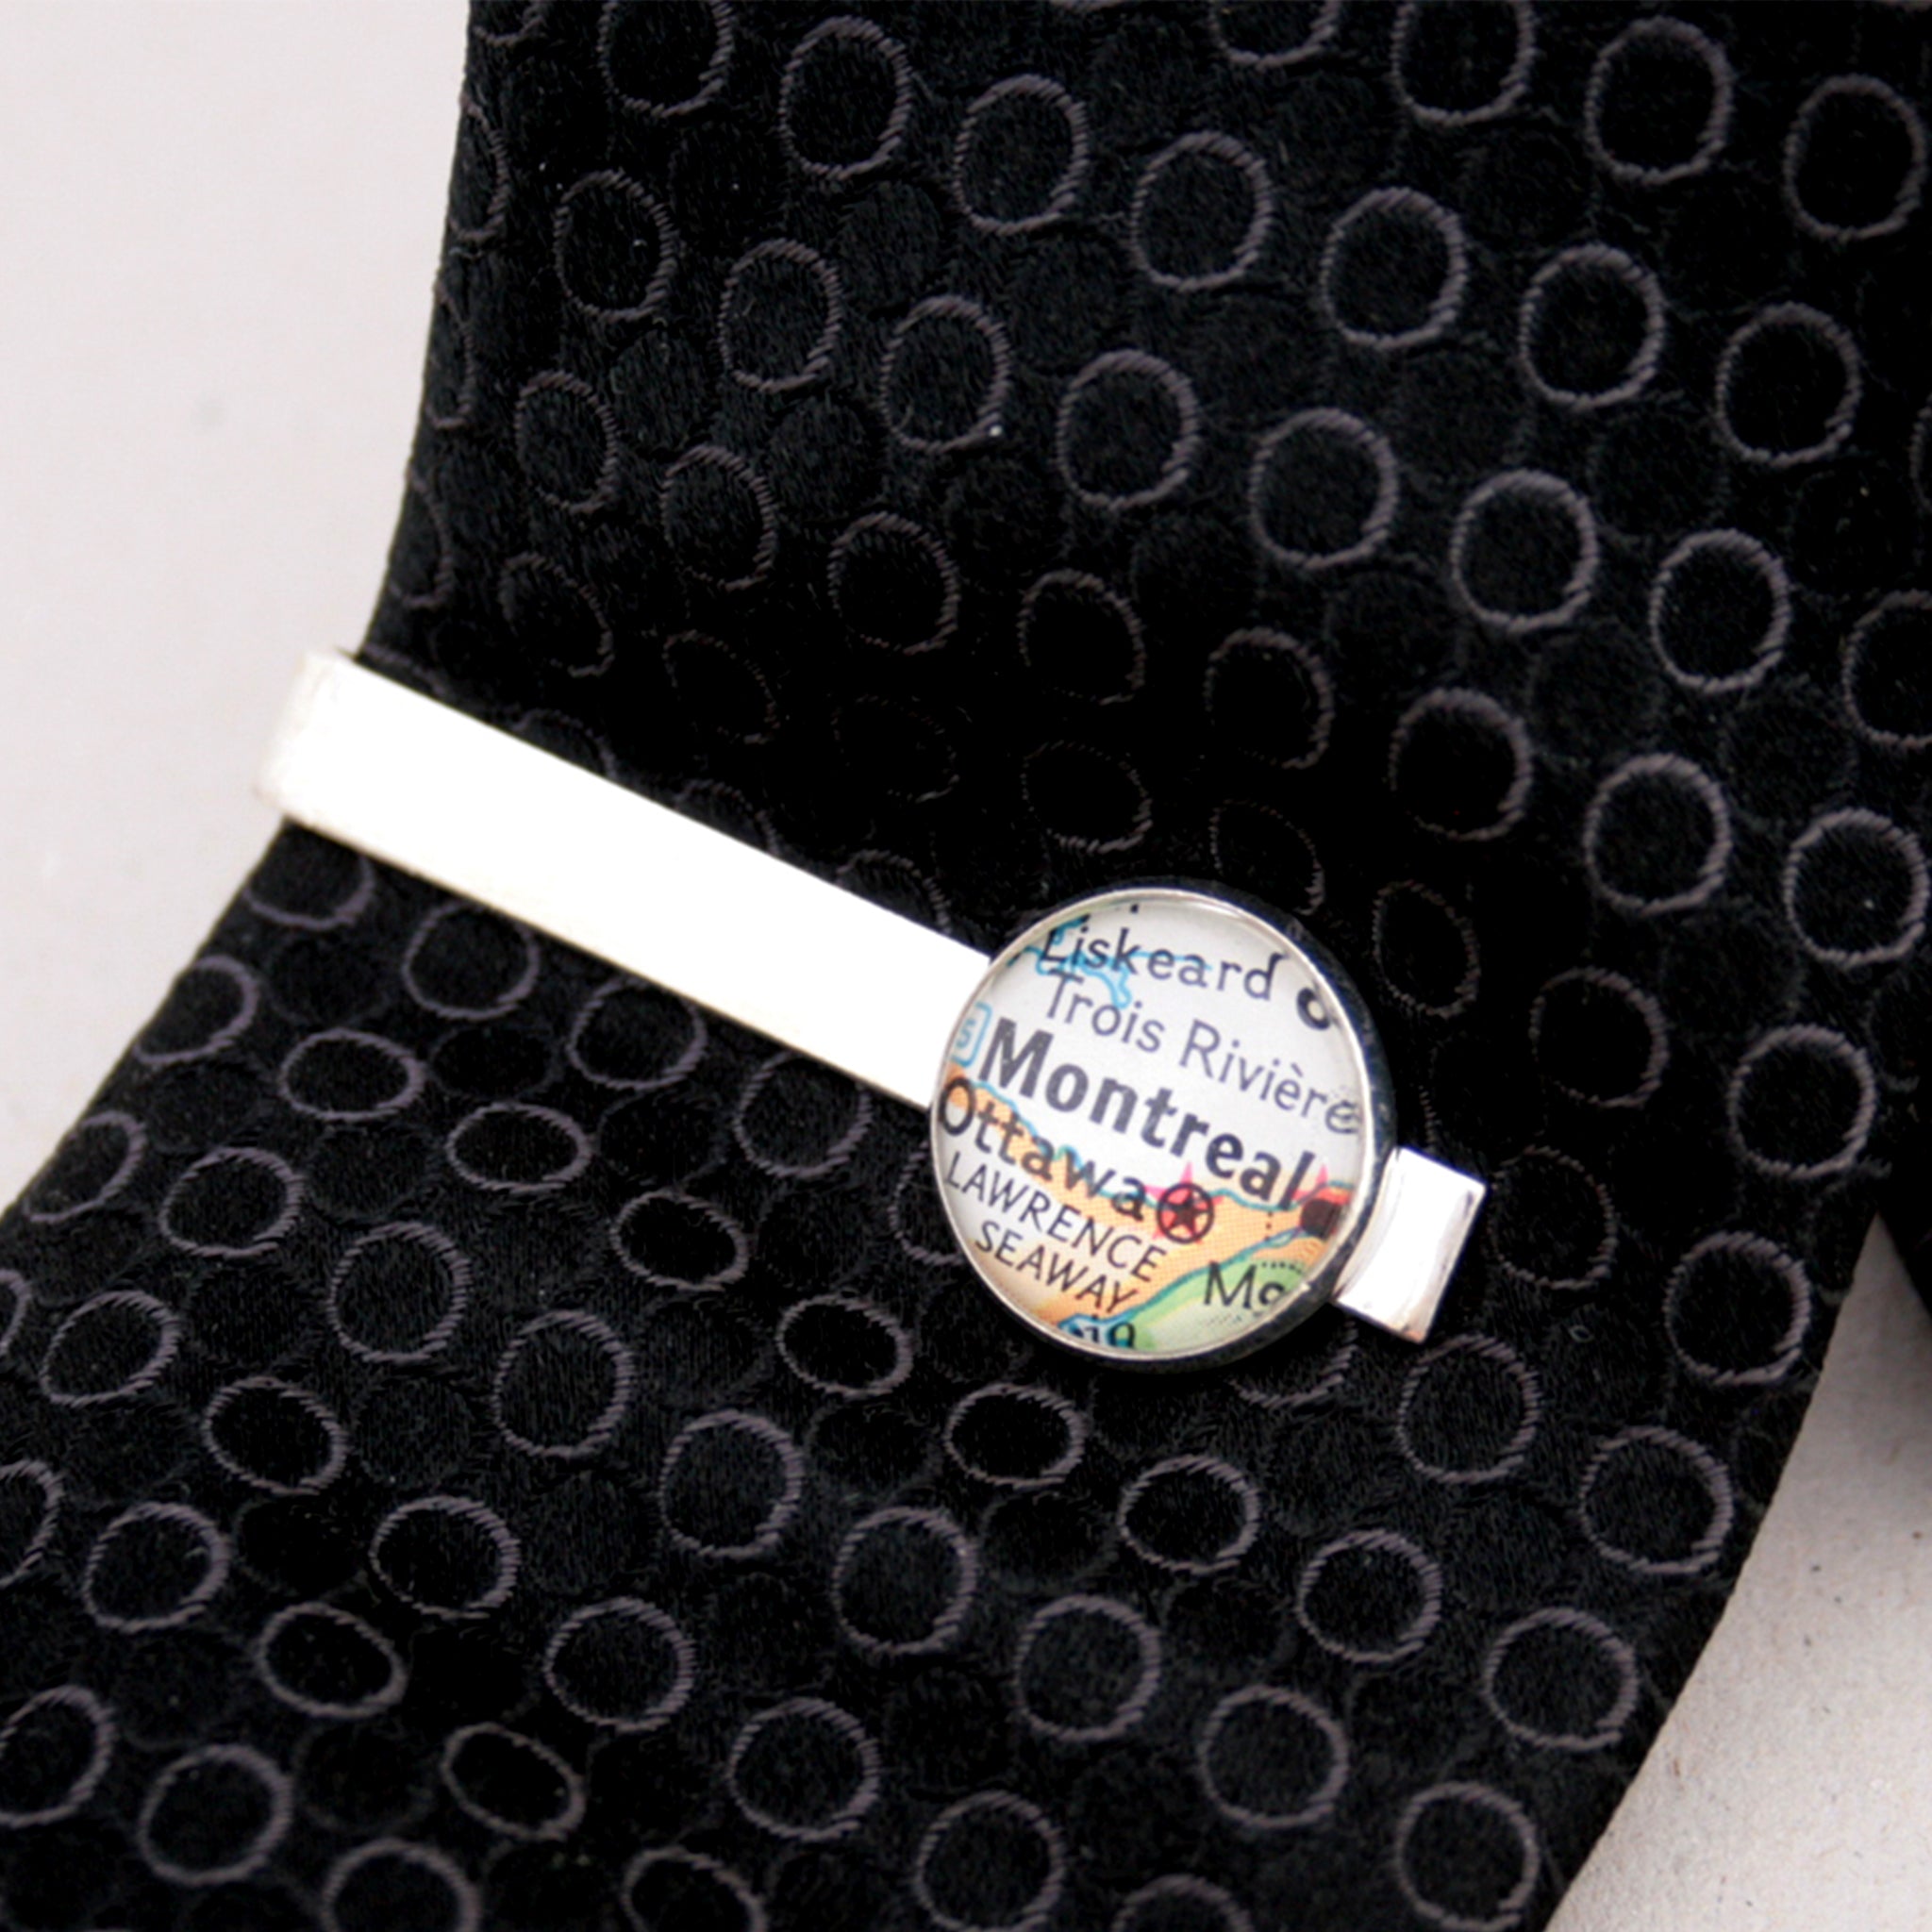 Personalised Tie Clip in silver color featuring map of Montreal on a black tie